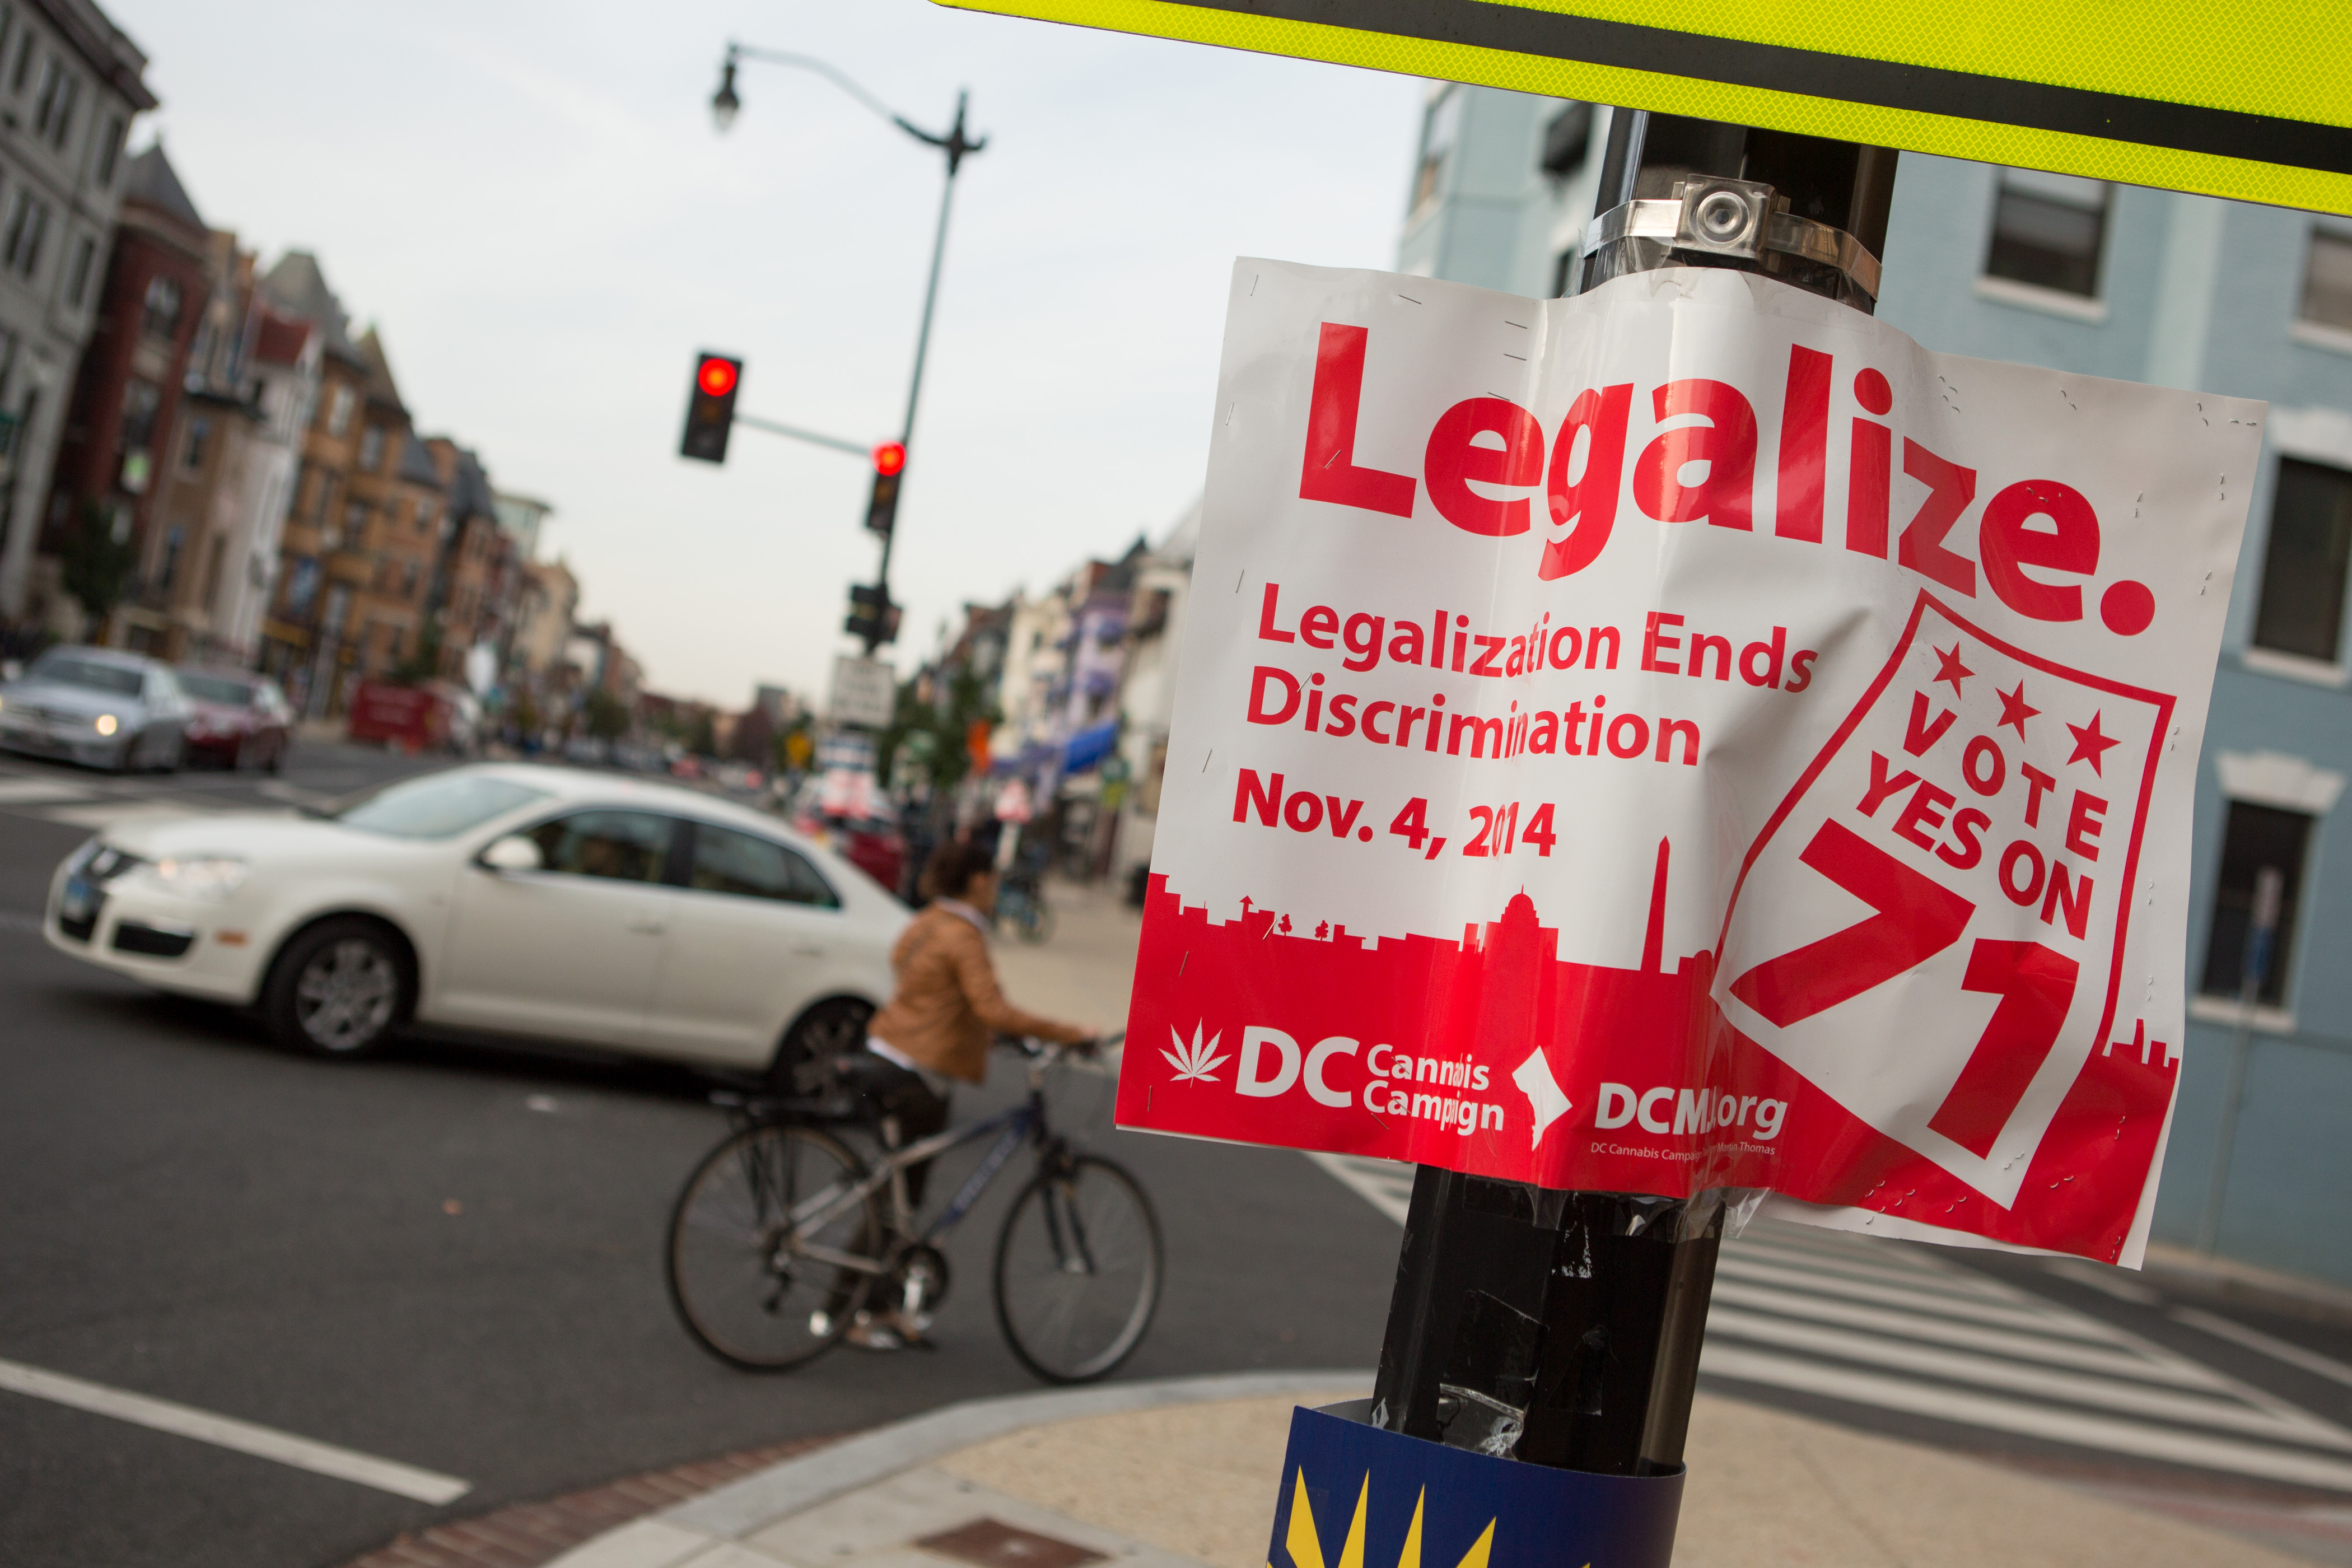 A sign promoting the DC Cannabis Campaign's initiative to legalize marijuana is displayed on a corner in the Adams Morgan neighborhood on November 4, 2014 in NW Washington D.C. (Allison Shelley—Getty Images)